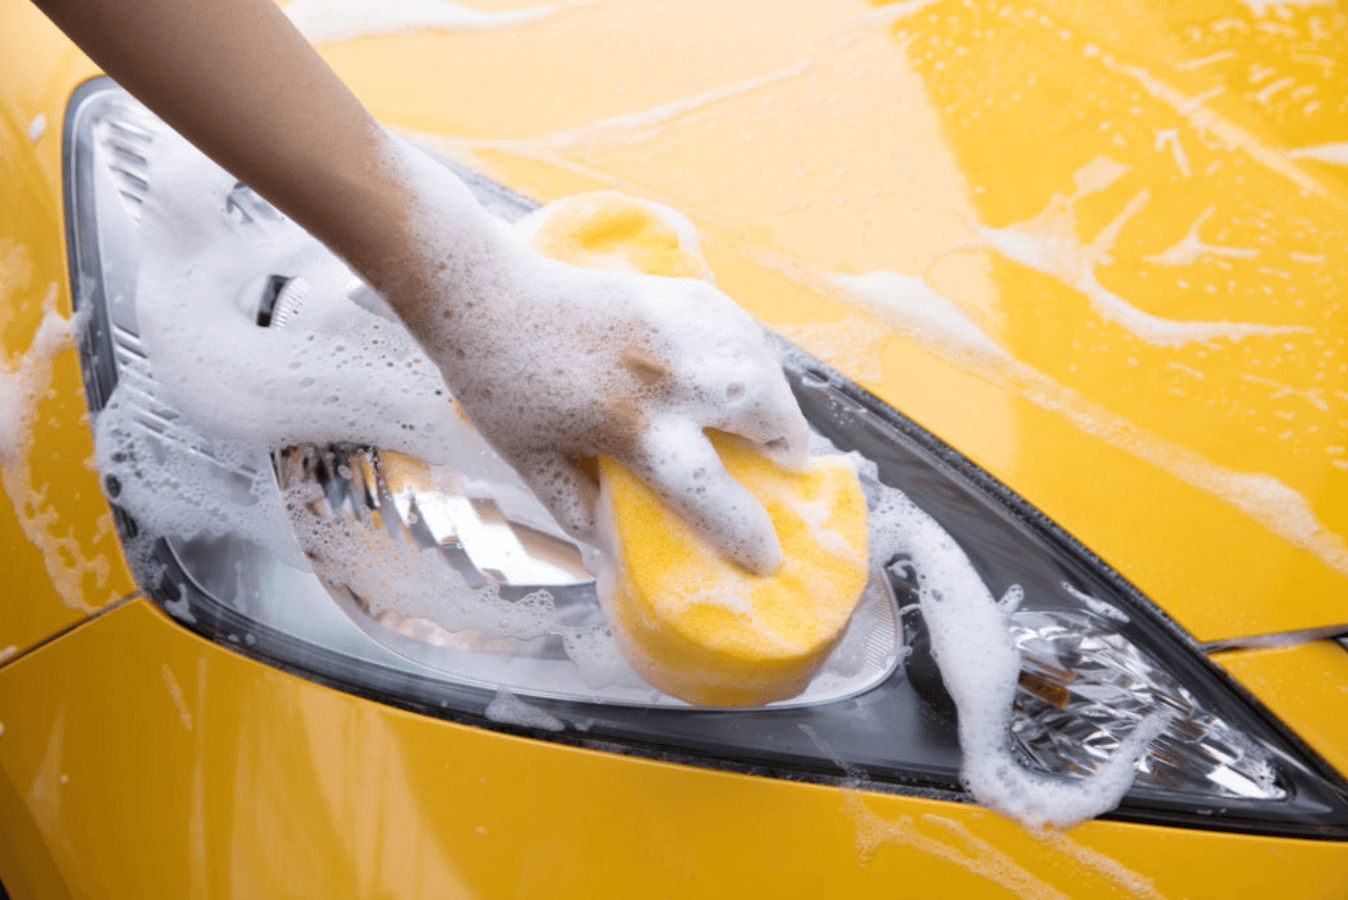 cleaning headlights with magic eraser